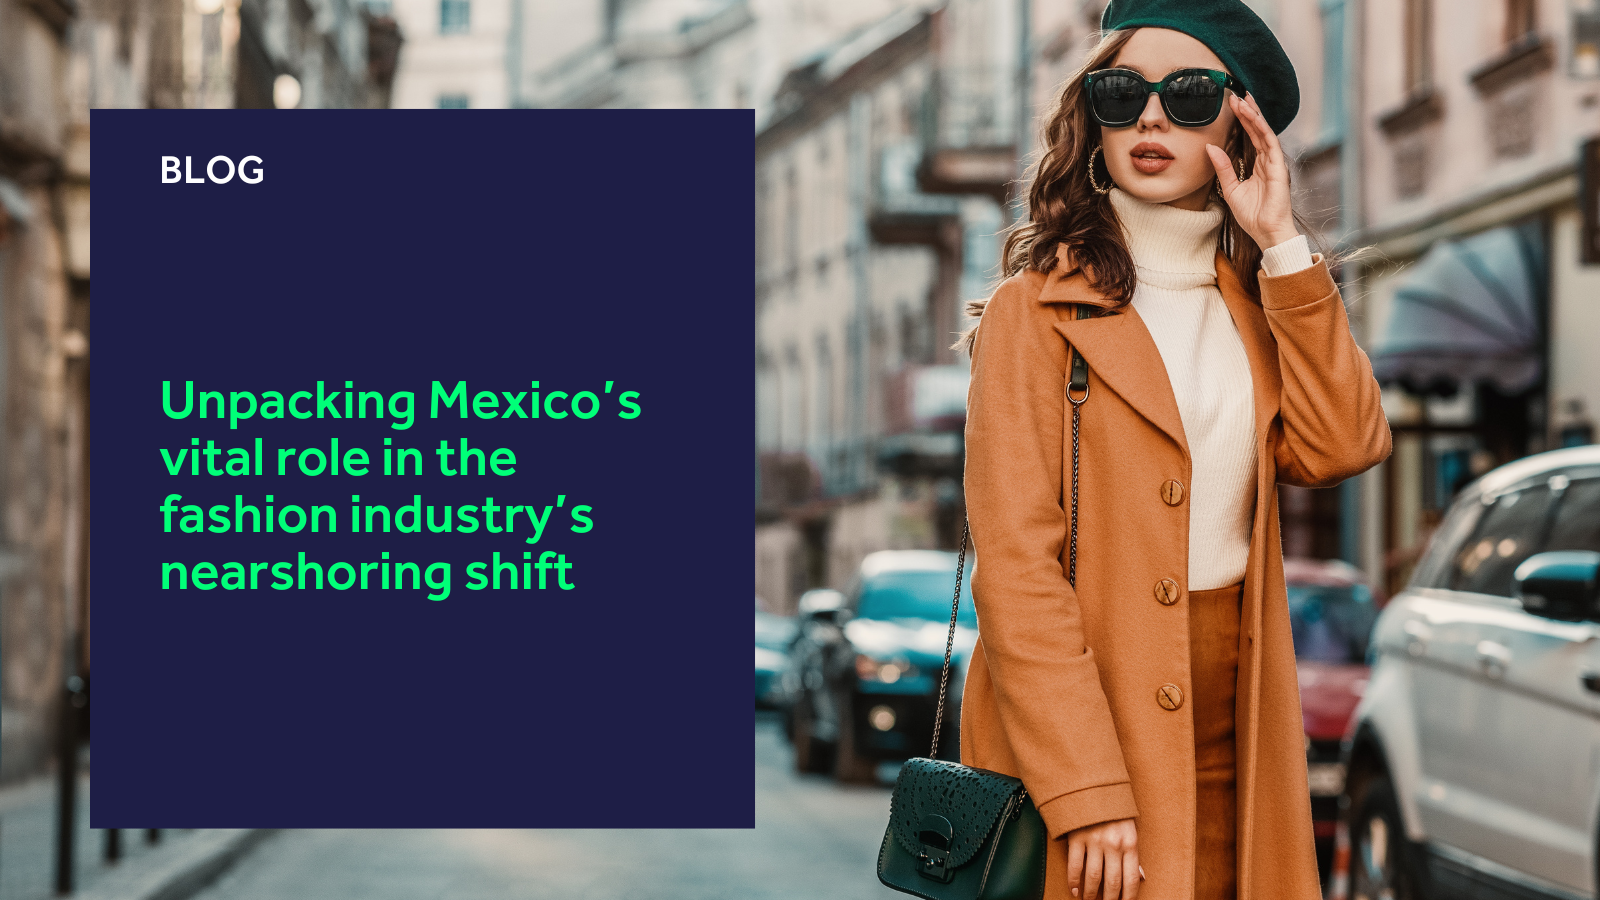 Unpacking Mexico’s vital role in the fashion industry’s nearshoring shift blog header